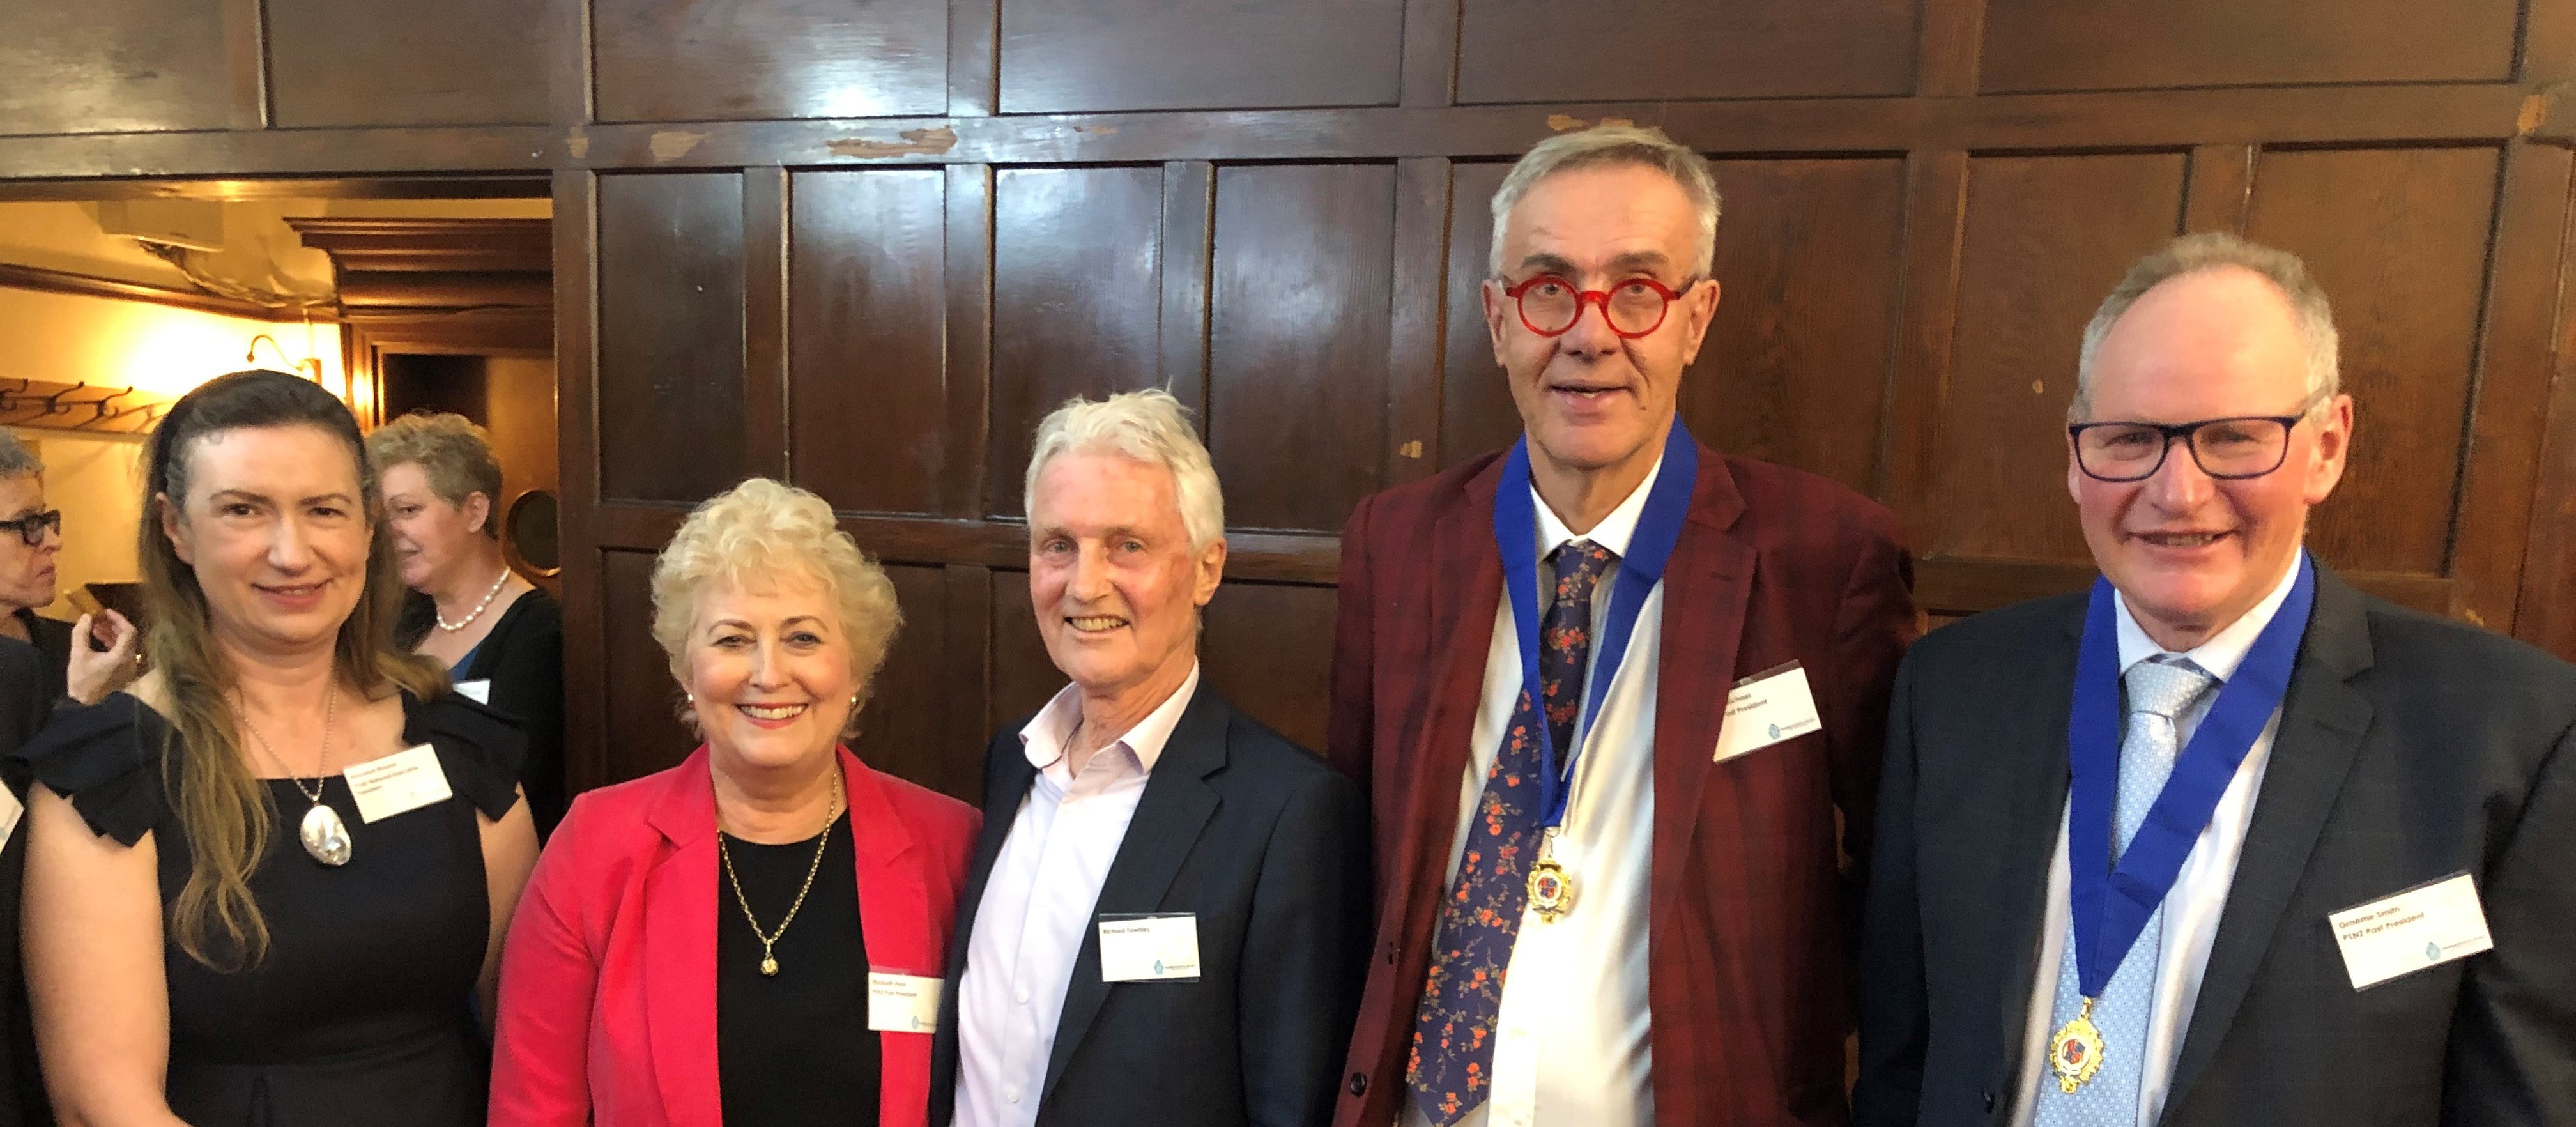 Richard townley with past PSNZ presidents